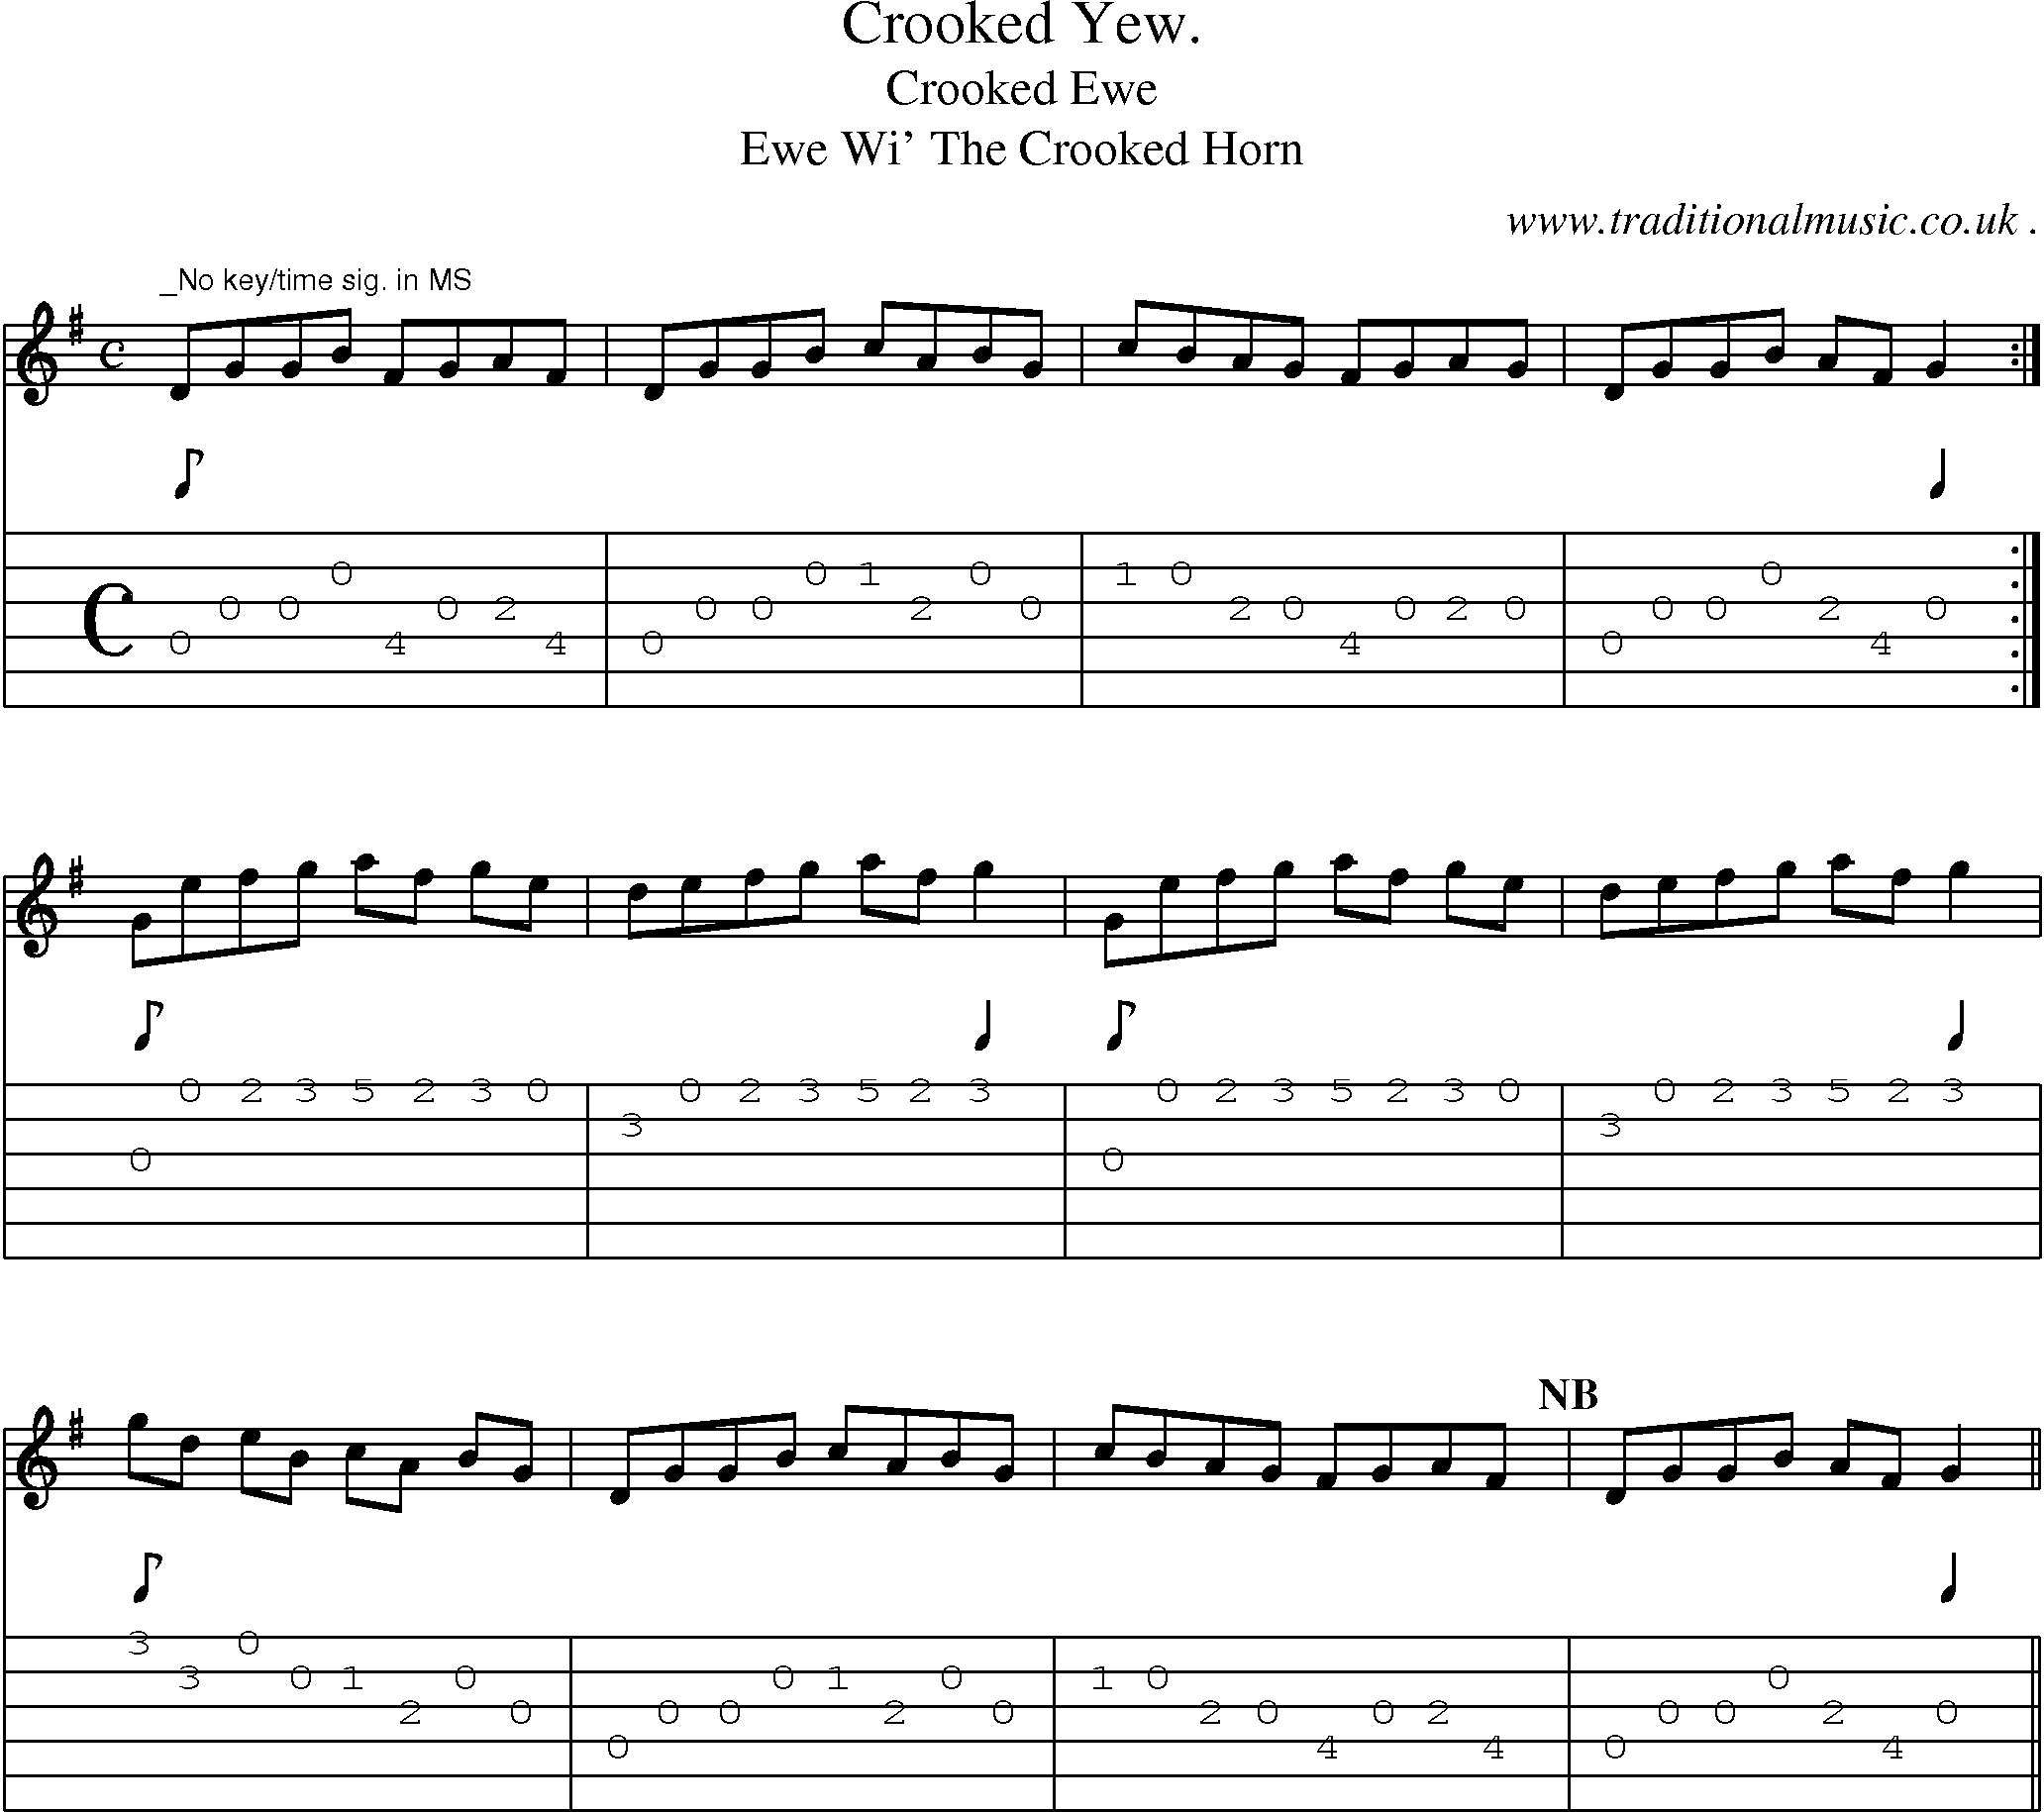 Sheet-Music and Guitar Tabs for Crooked Yew